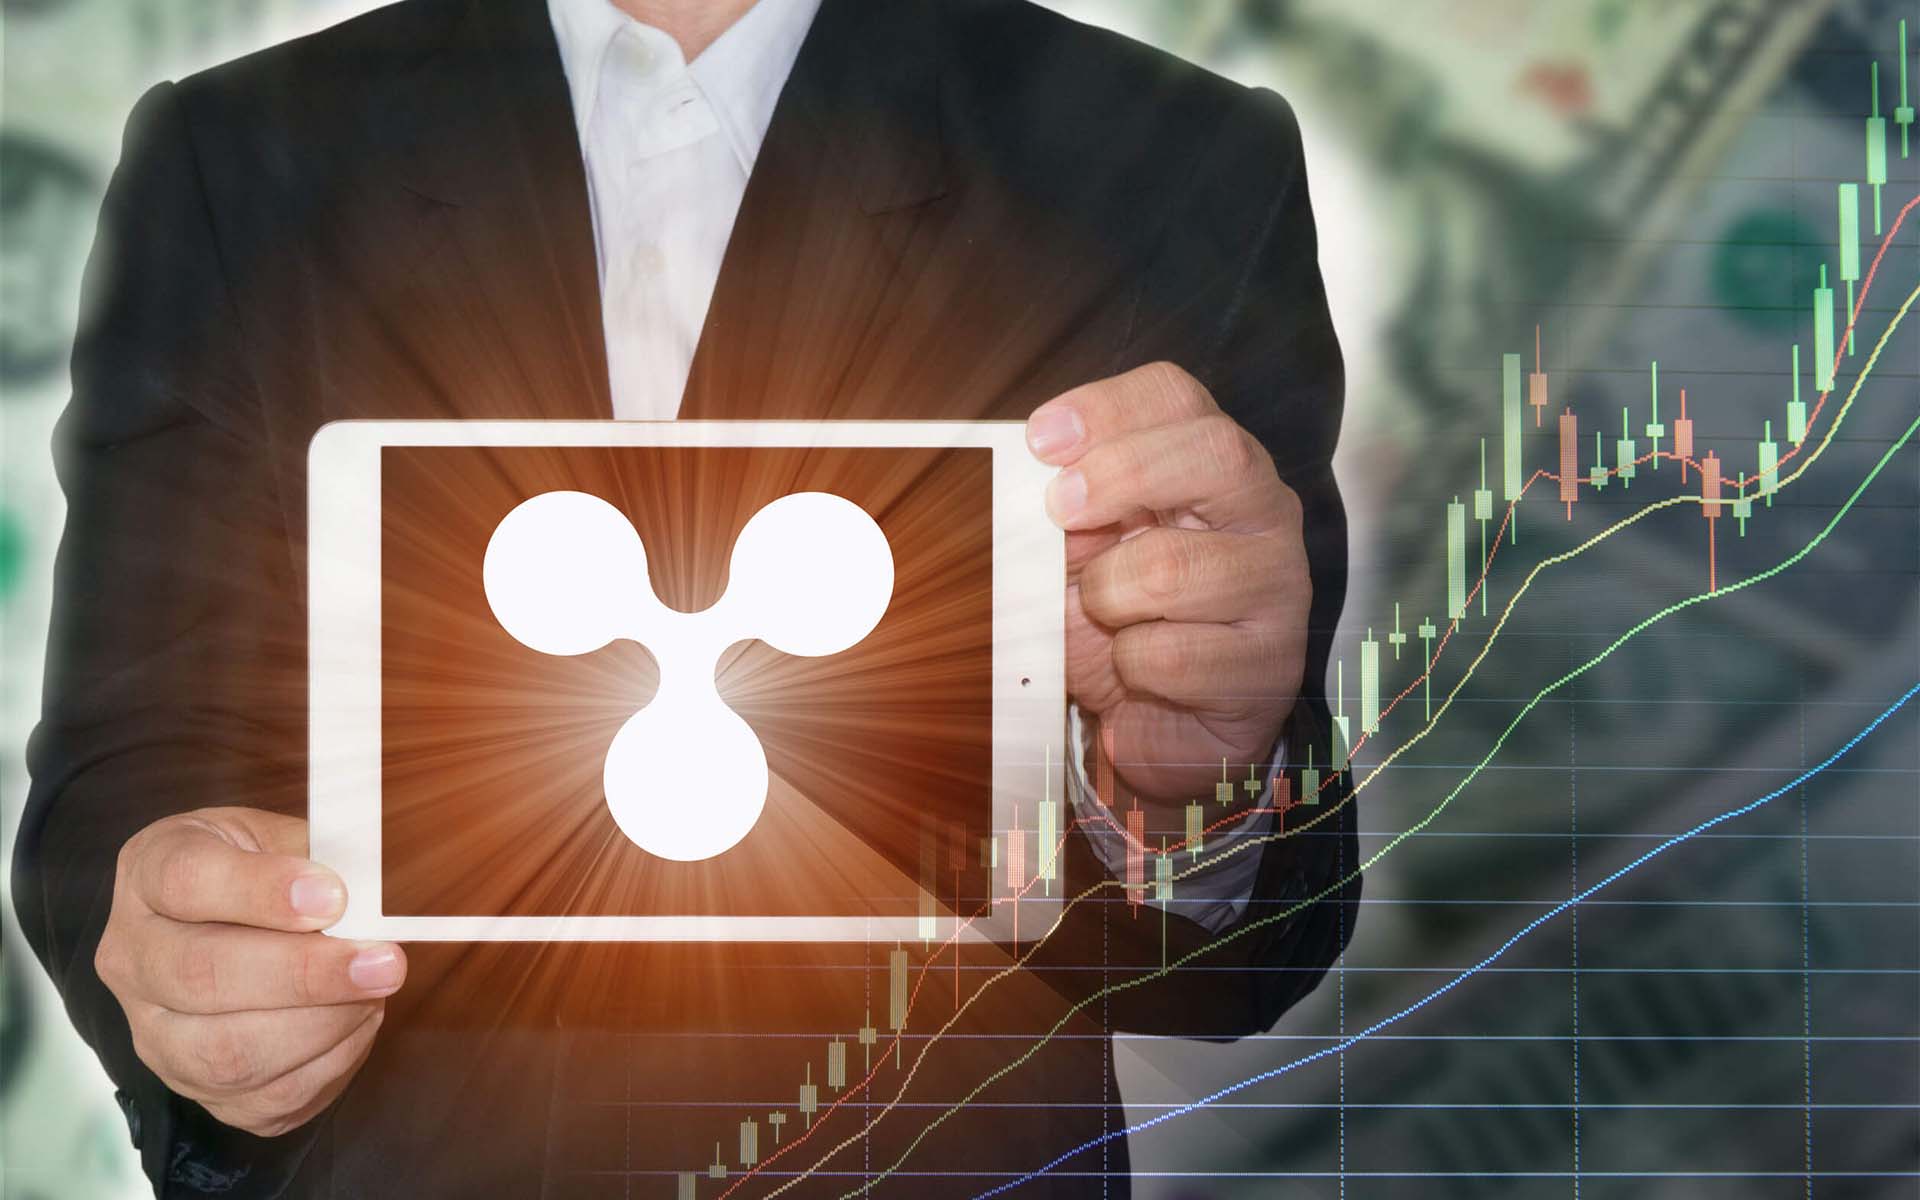 Ripple Announces Xpring Initiative to Build Ecosystem Around XRP